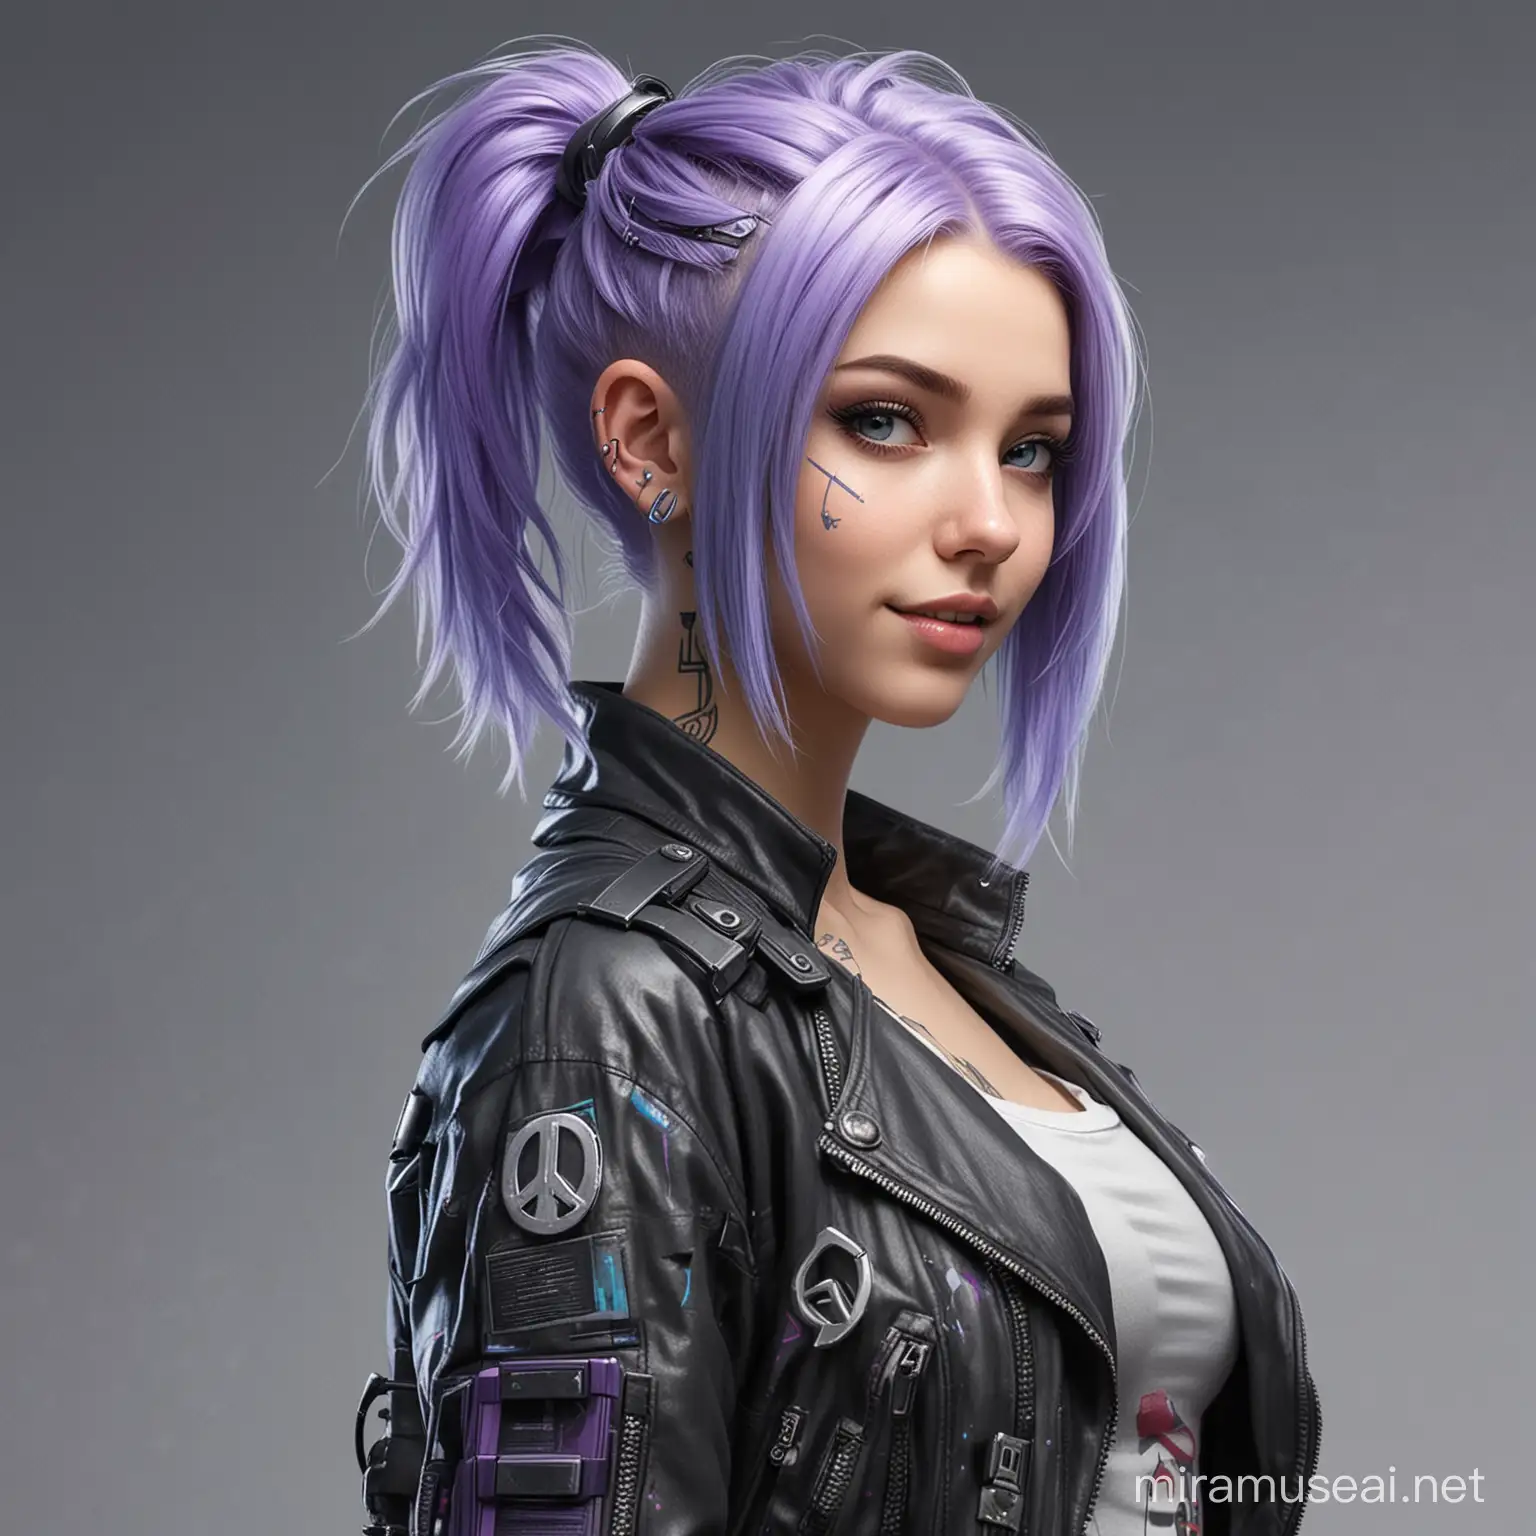 Create a 15 year old cyberpunk girl with short side-swept light blue and purple hair who is posing.  Making the peace symbol Make the girl smile slyly. not a lot of skin showing